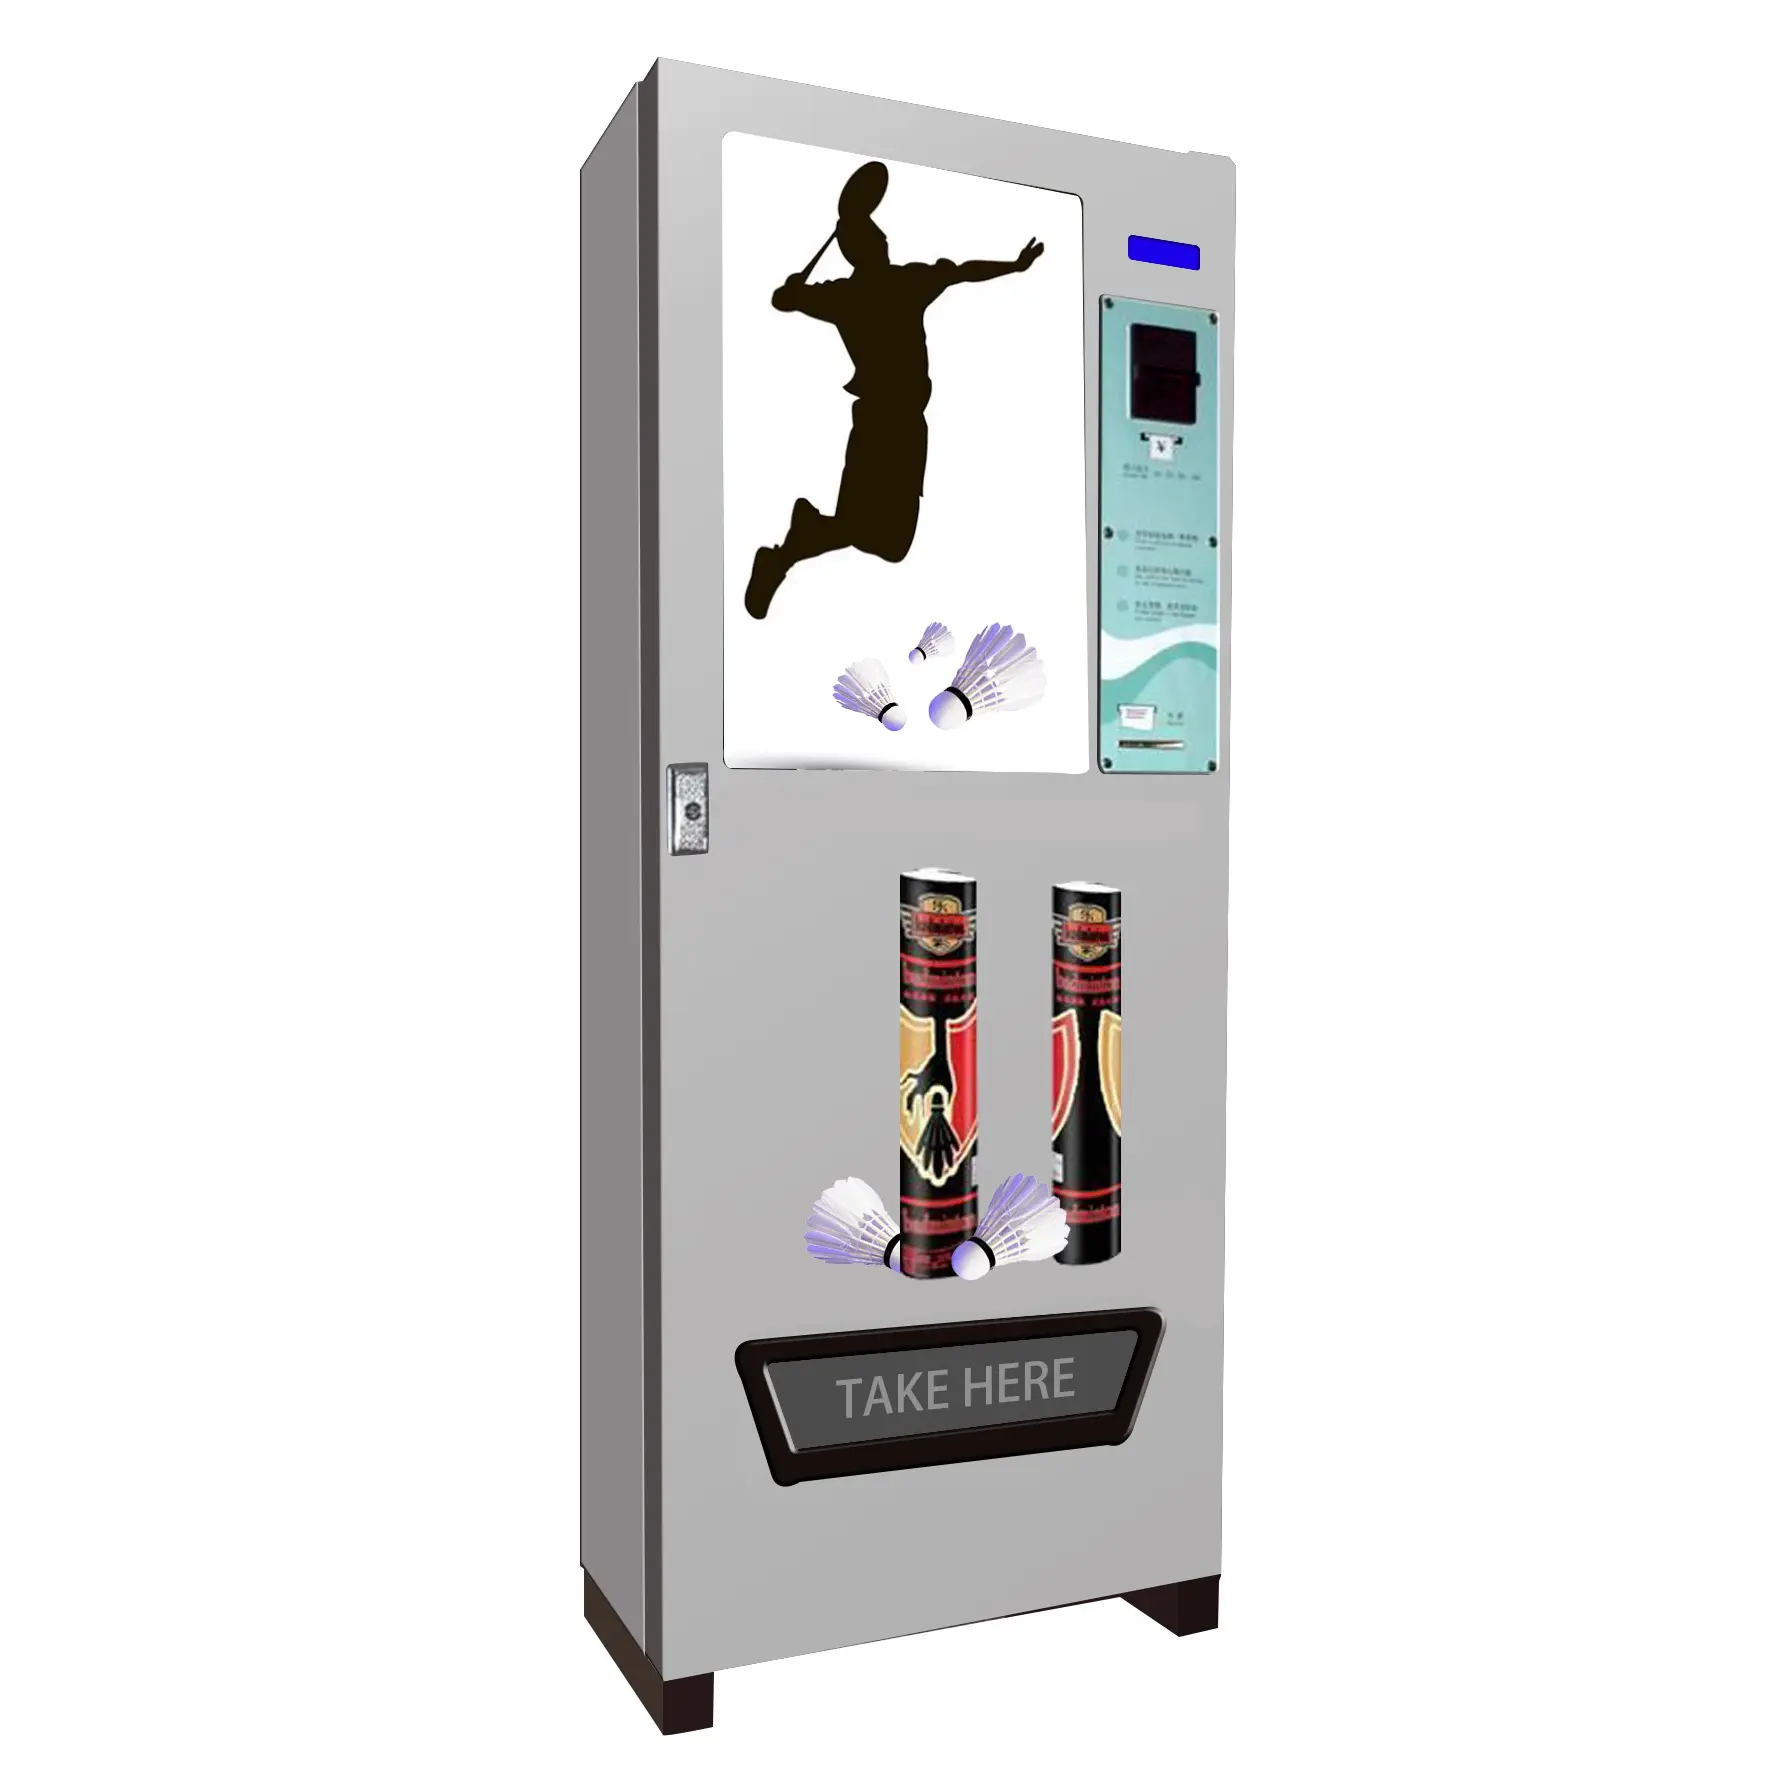 Multi-function full automatic shuttlecock badminton vending machine with online payment system rent payment system VIP system